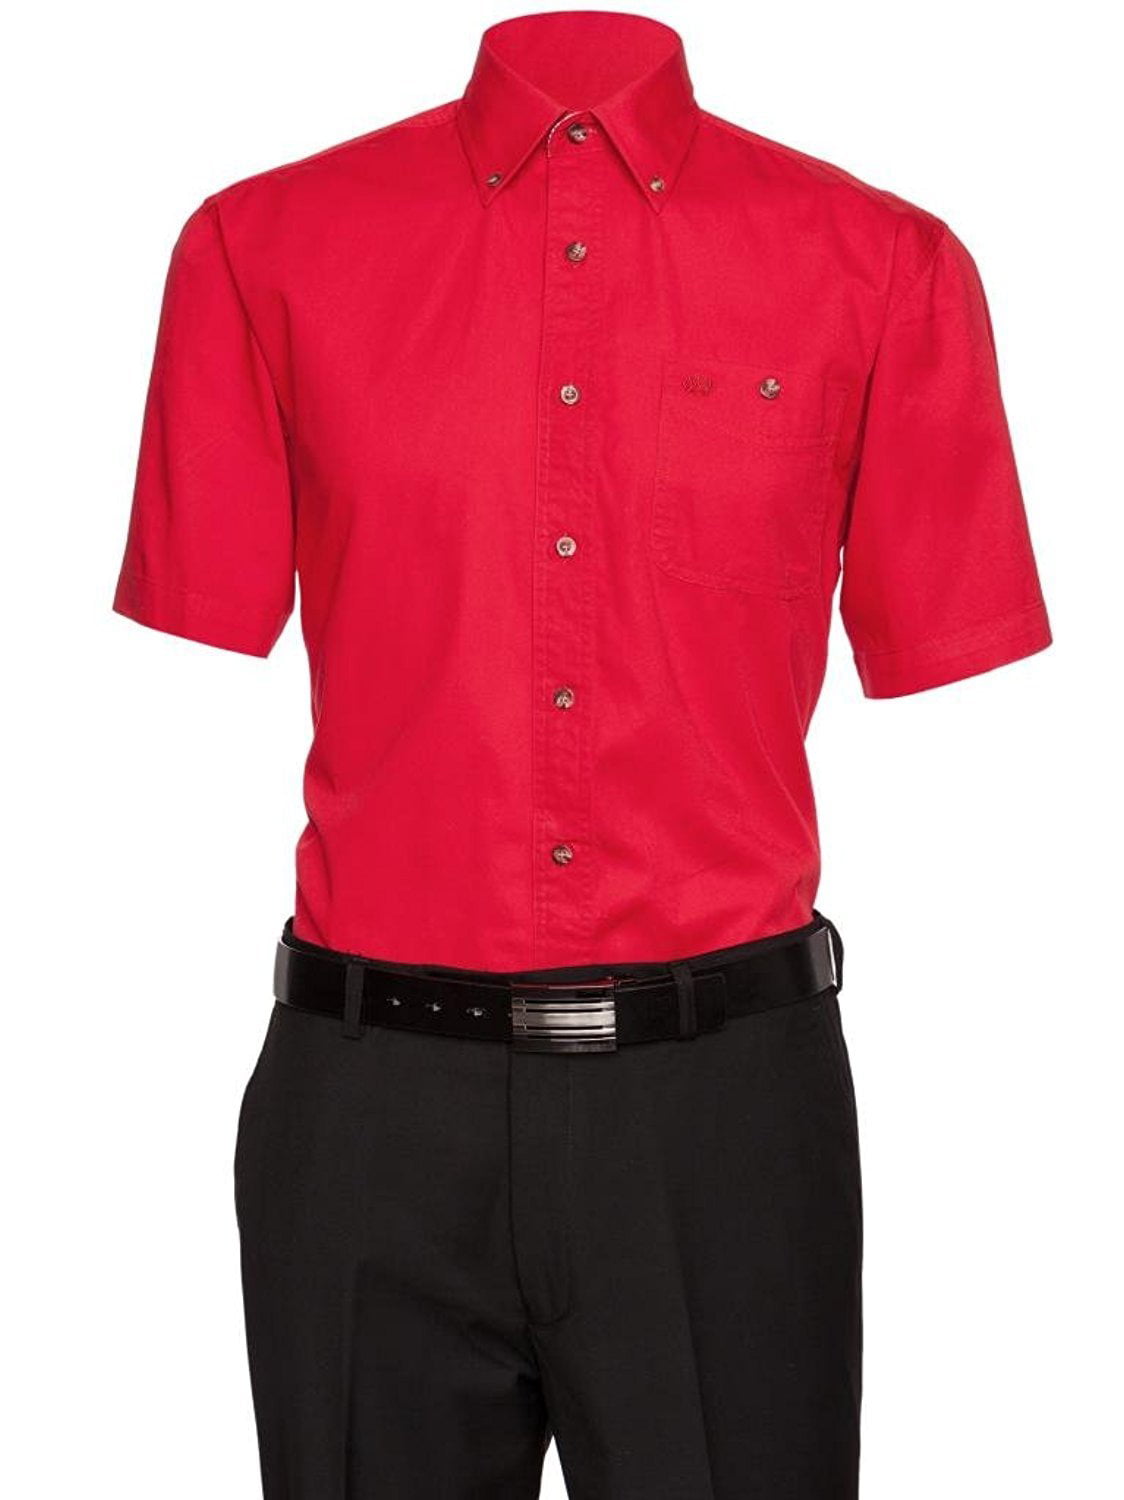 mens red button down shirt with blue pants